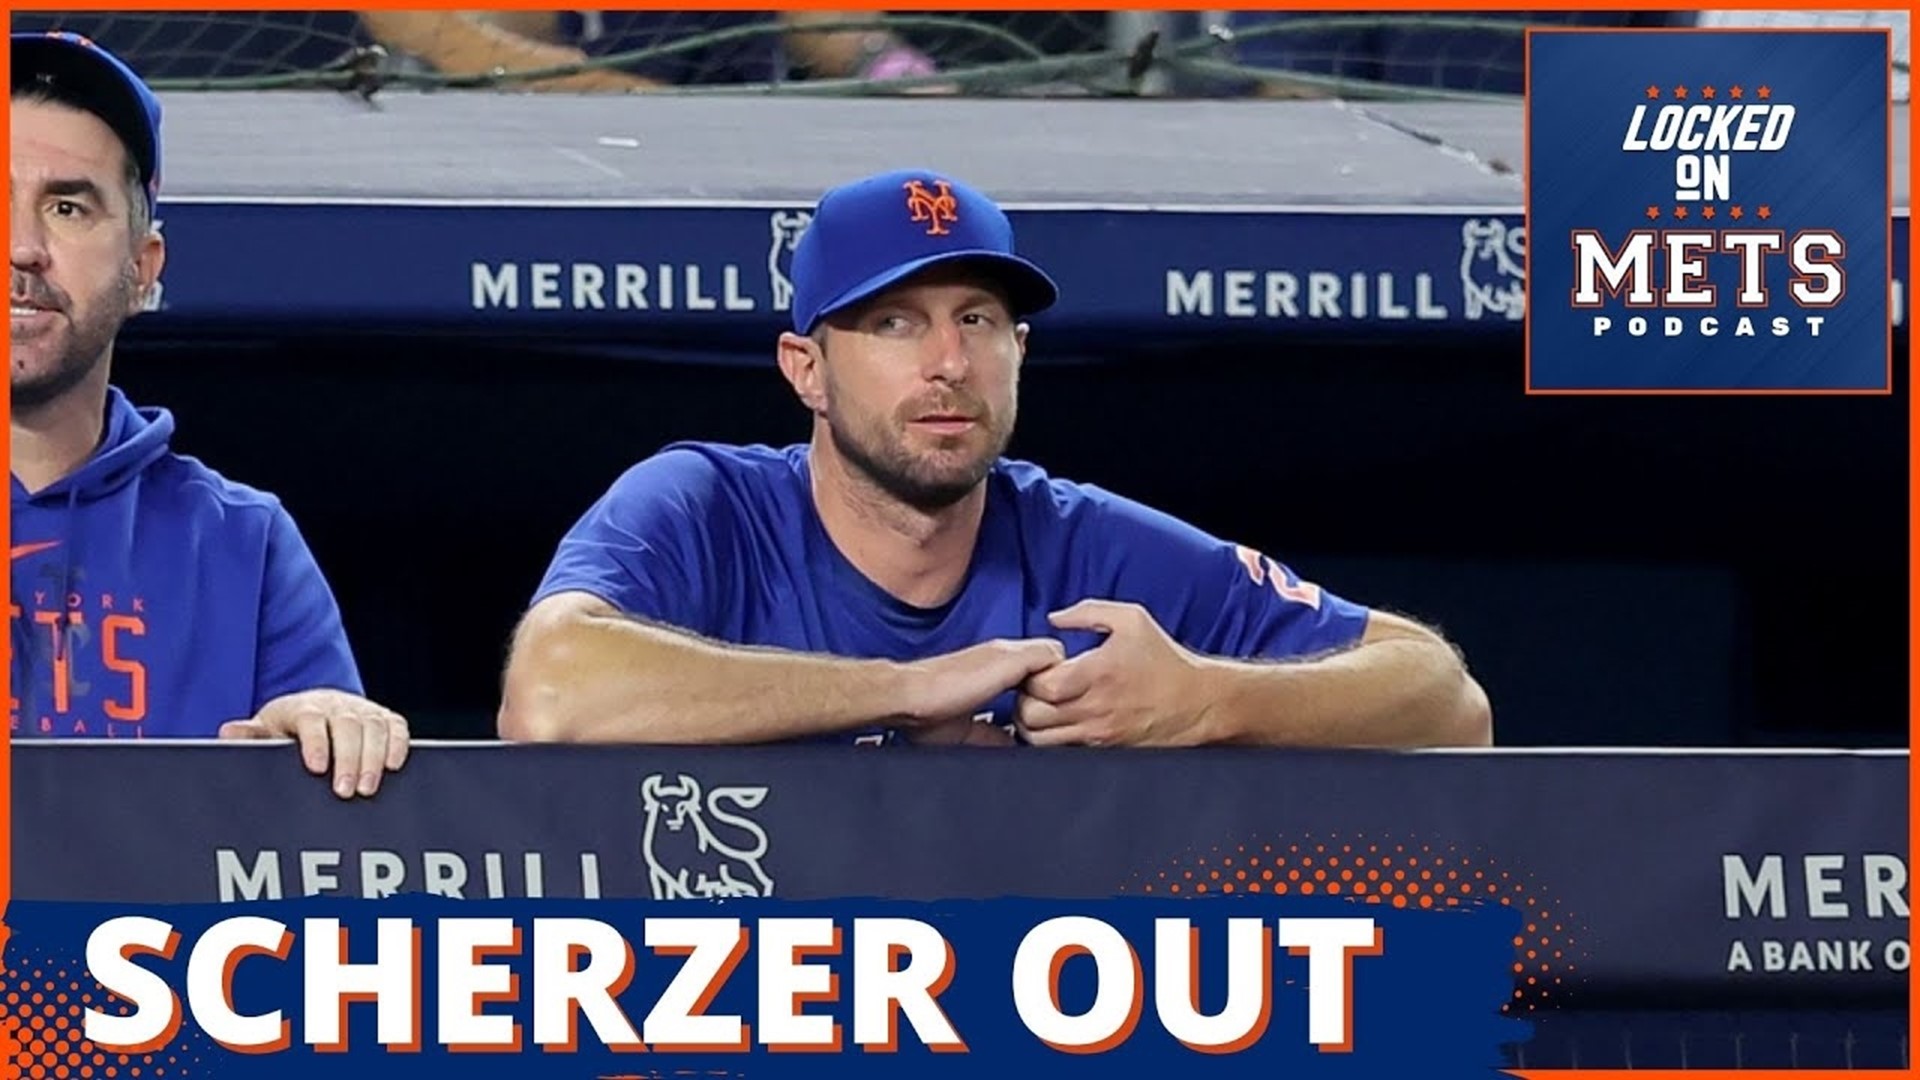 What Max Scherzer's Return Means for the New York Mets